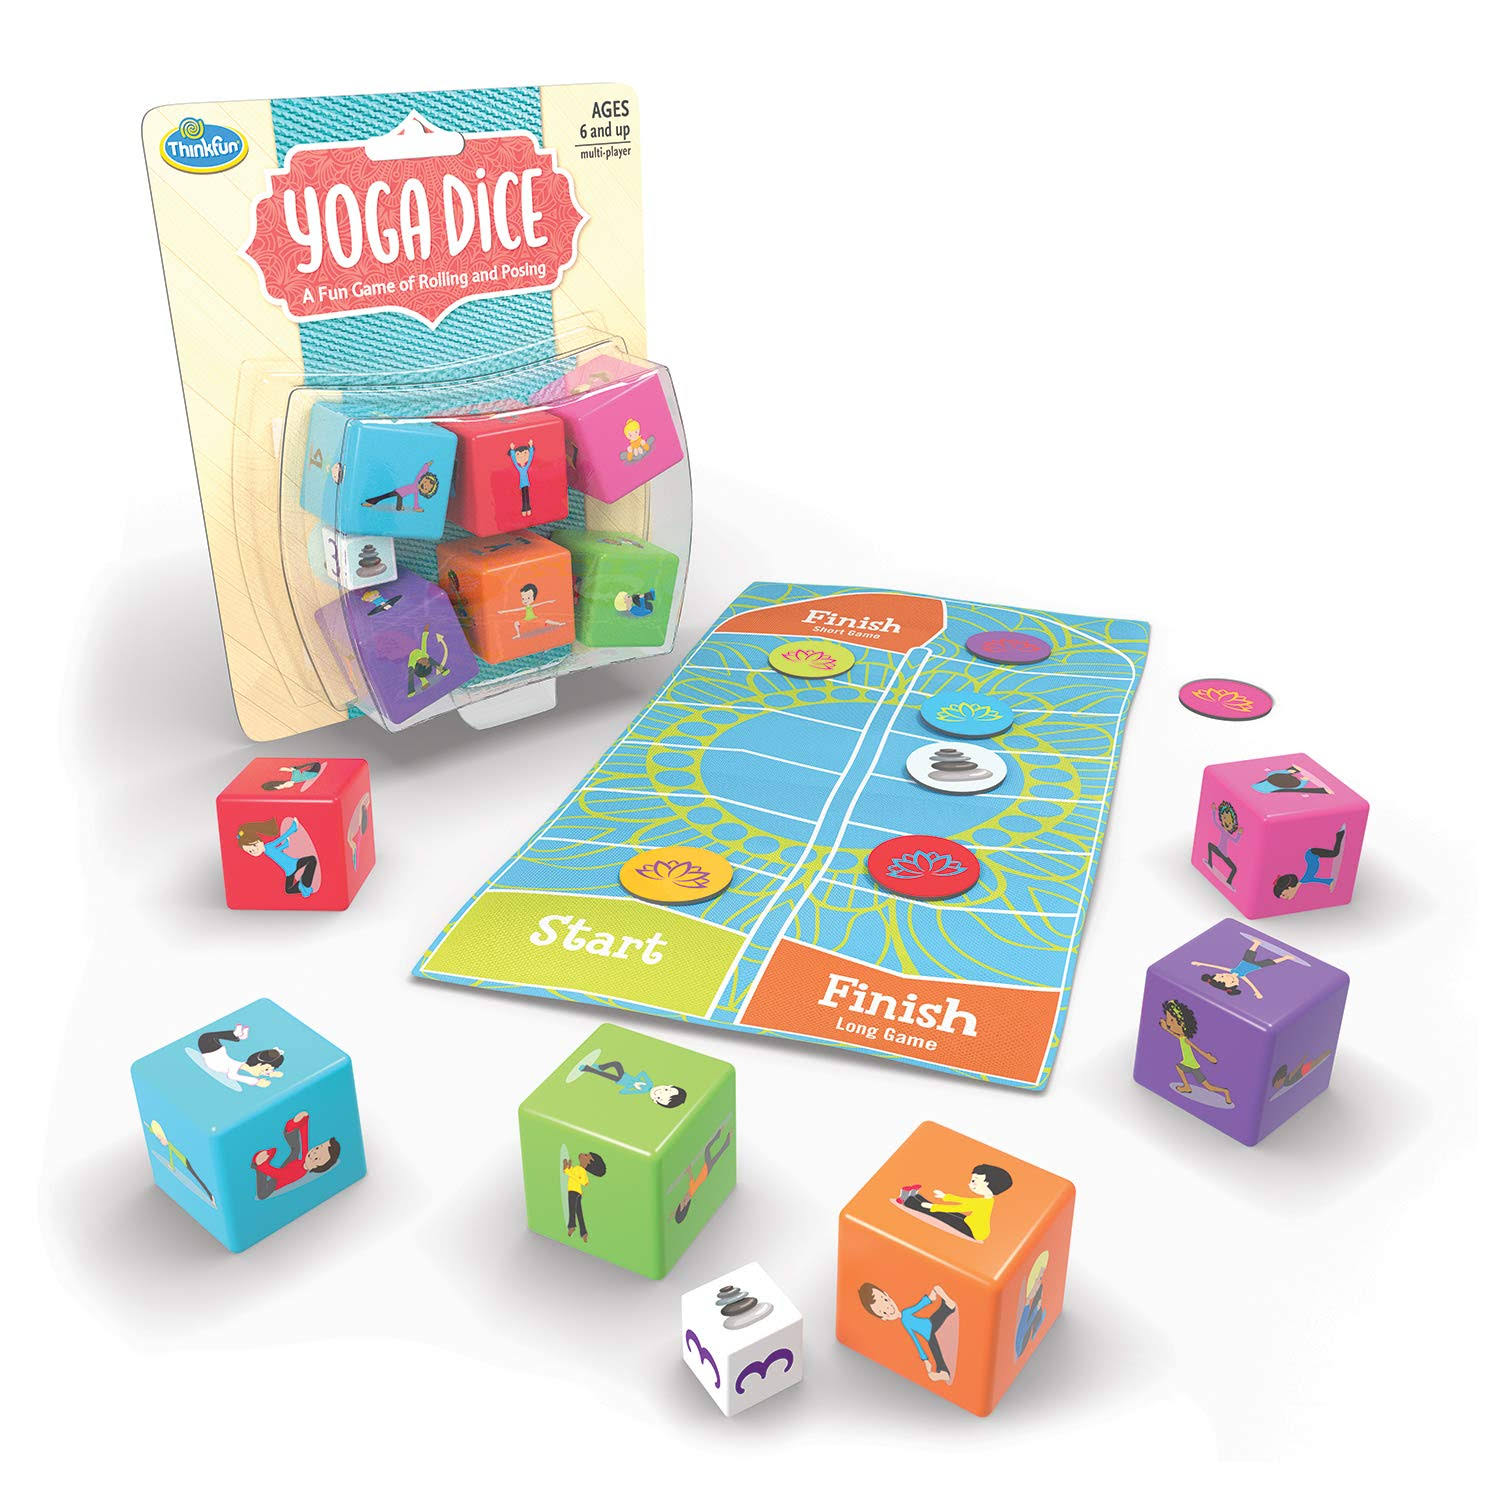 Thinkfun Yoga Dice Game for Boys and Girls Ages 6 and Up - Learn Yoga